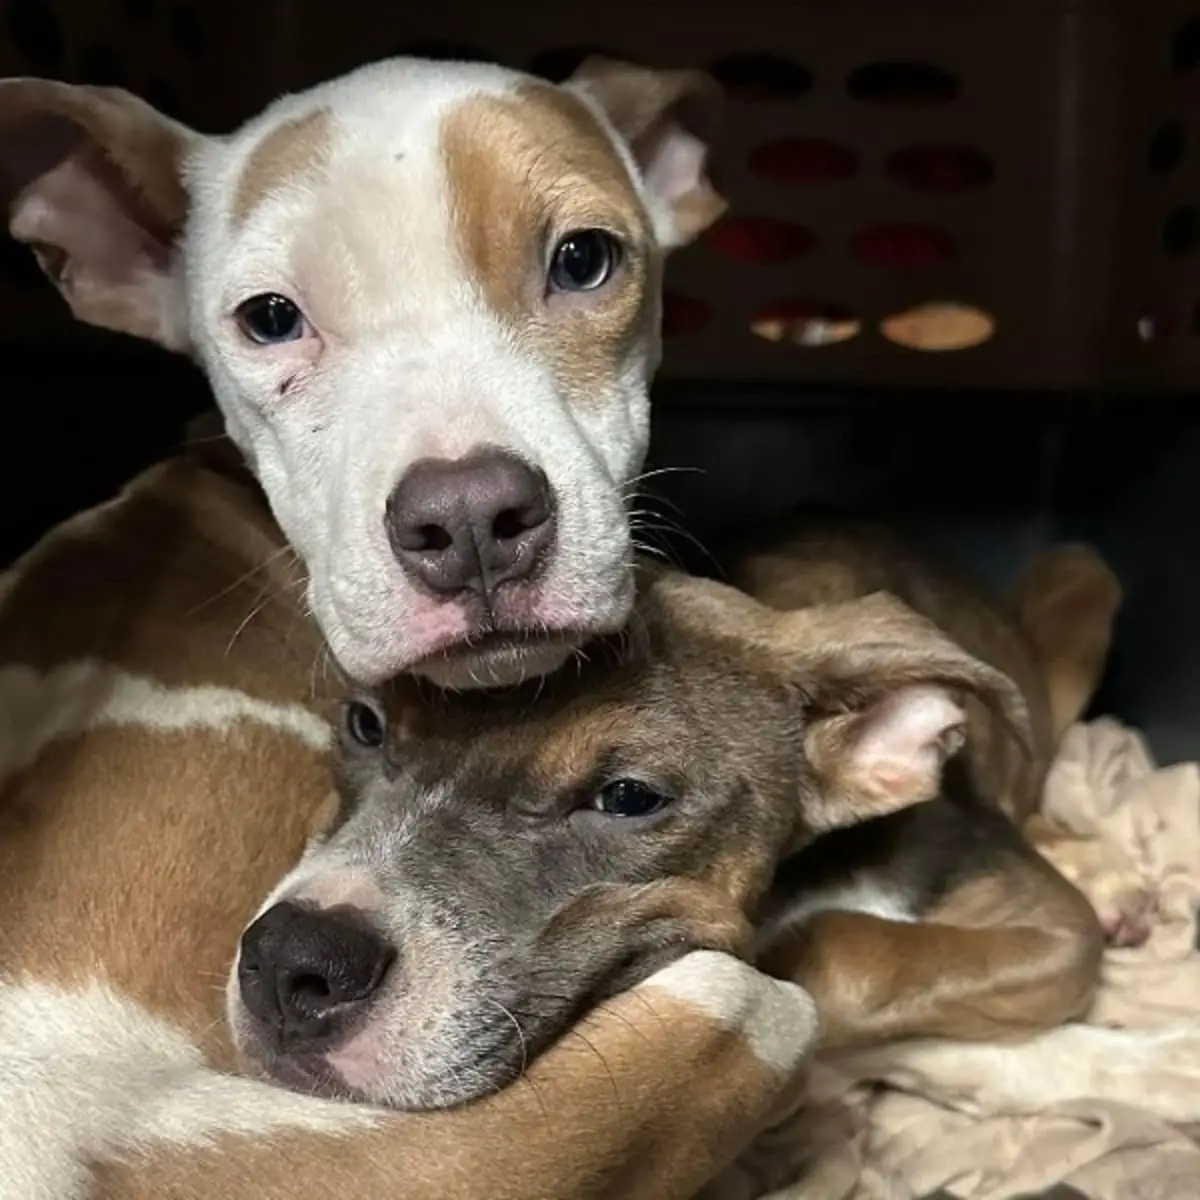 Helpless Hounds Dog Rescue Saving Abandoned Dogs and Giving Them a Second Chance at Life